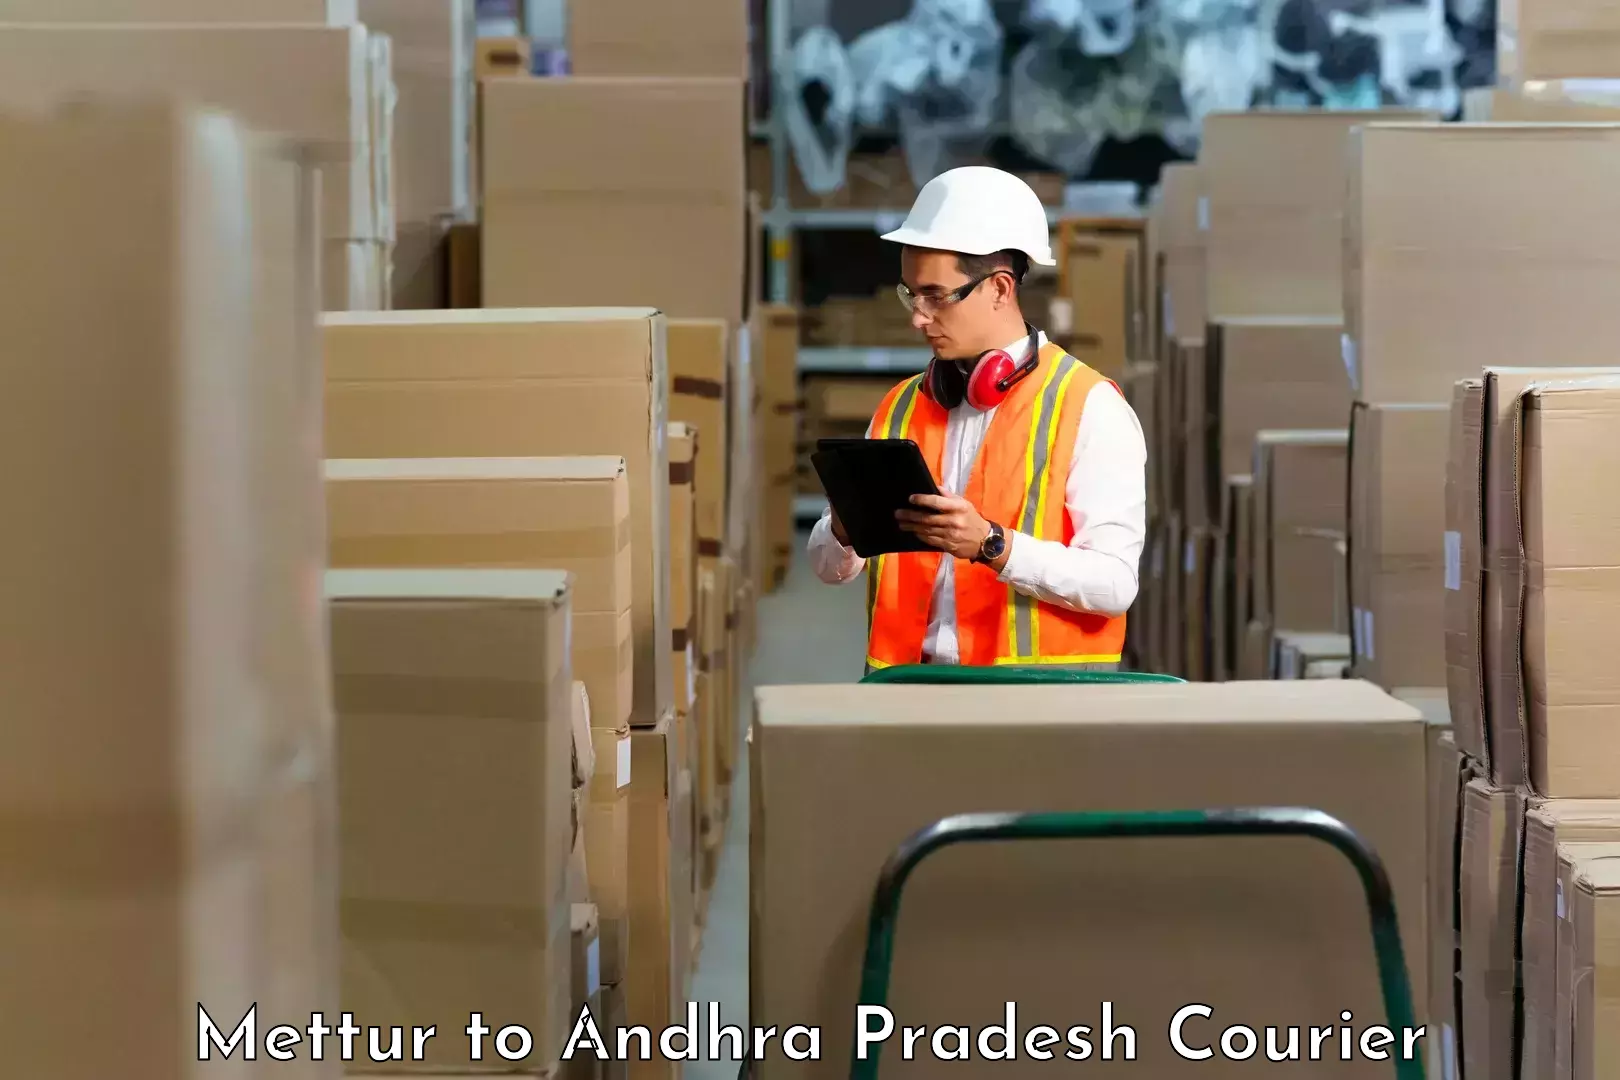 Express mail solutions Mettur to Andhra Pradesh